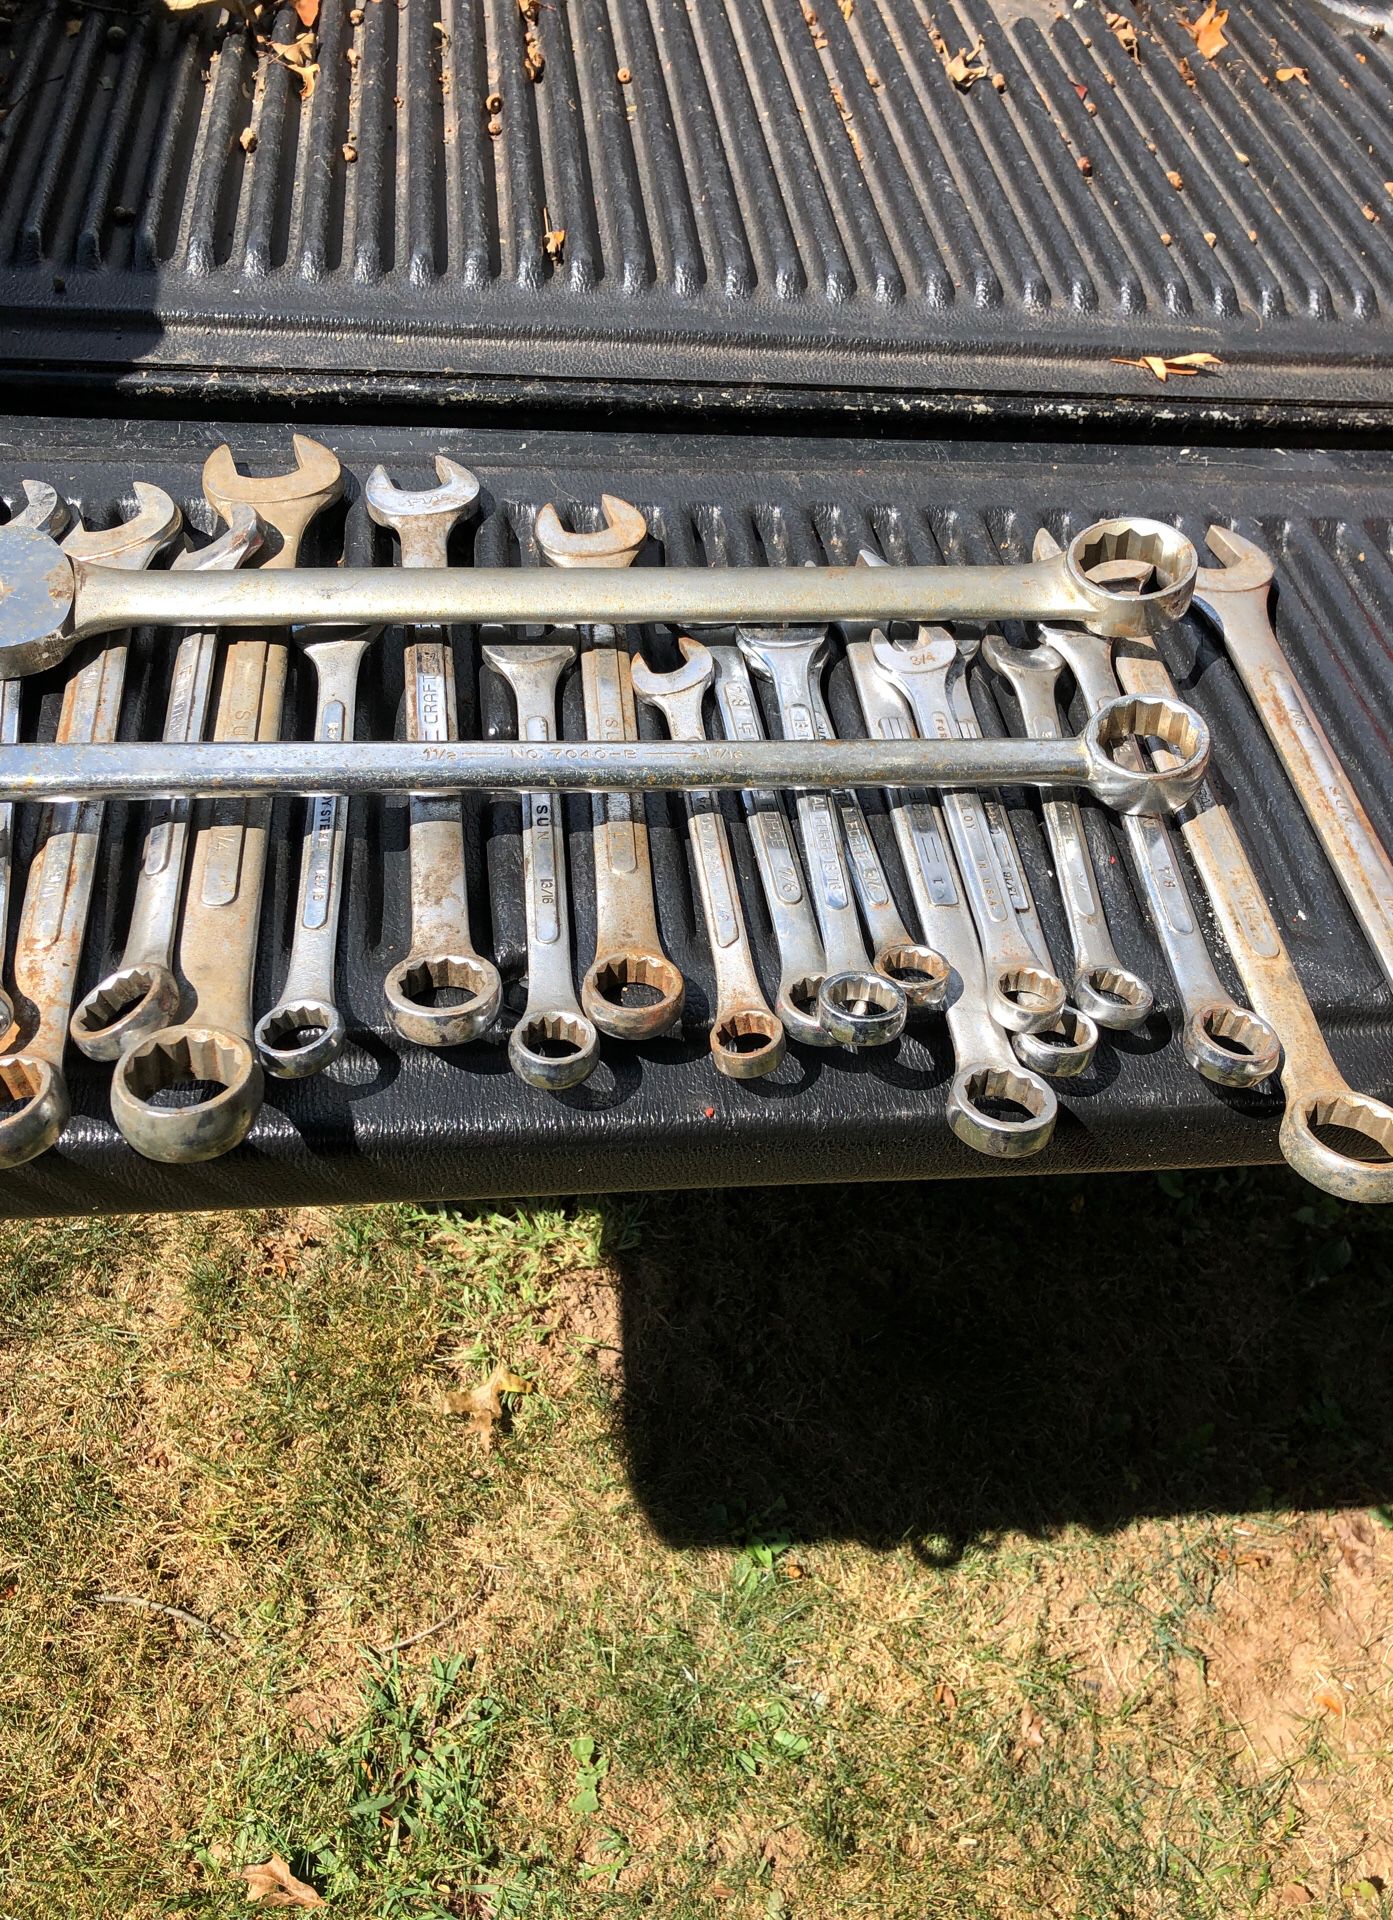 TRUCK S.A.E. WRENCHES (25 WRENCHES)